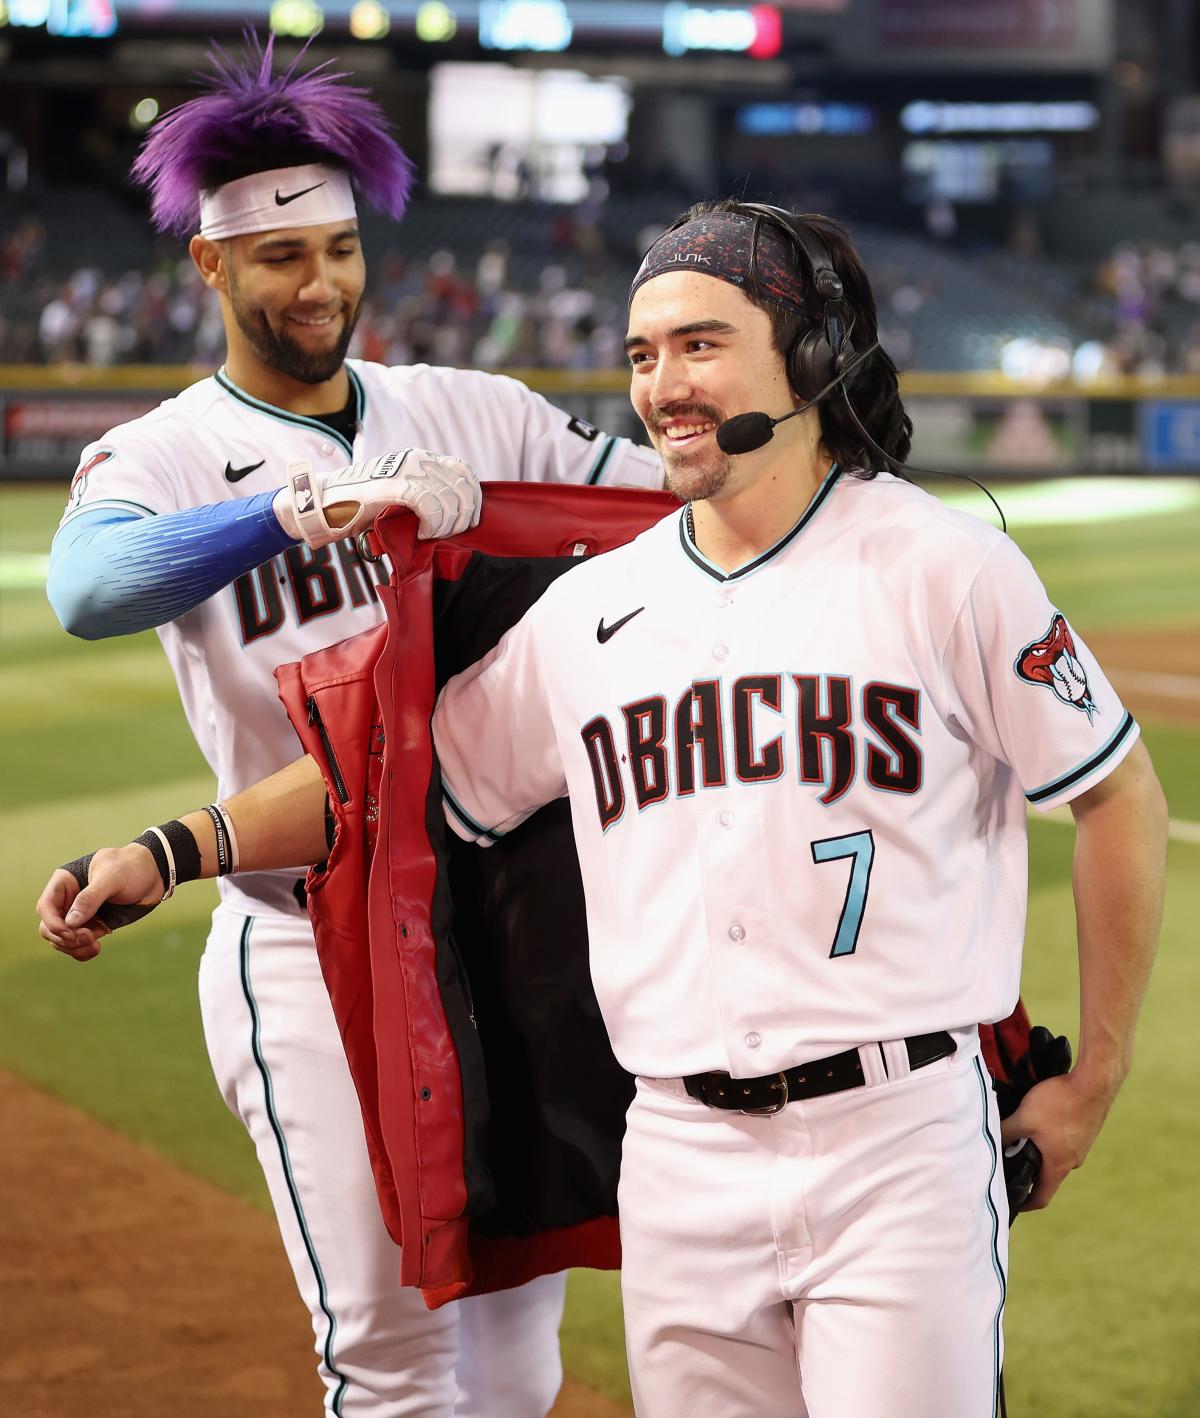 Arizona Diamondbacks projected to have 4 MLB All-Stars in 2023 All-Star Game